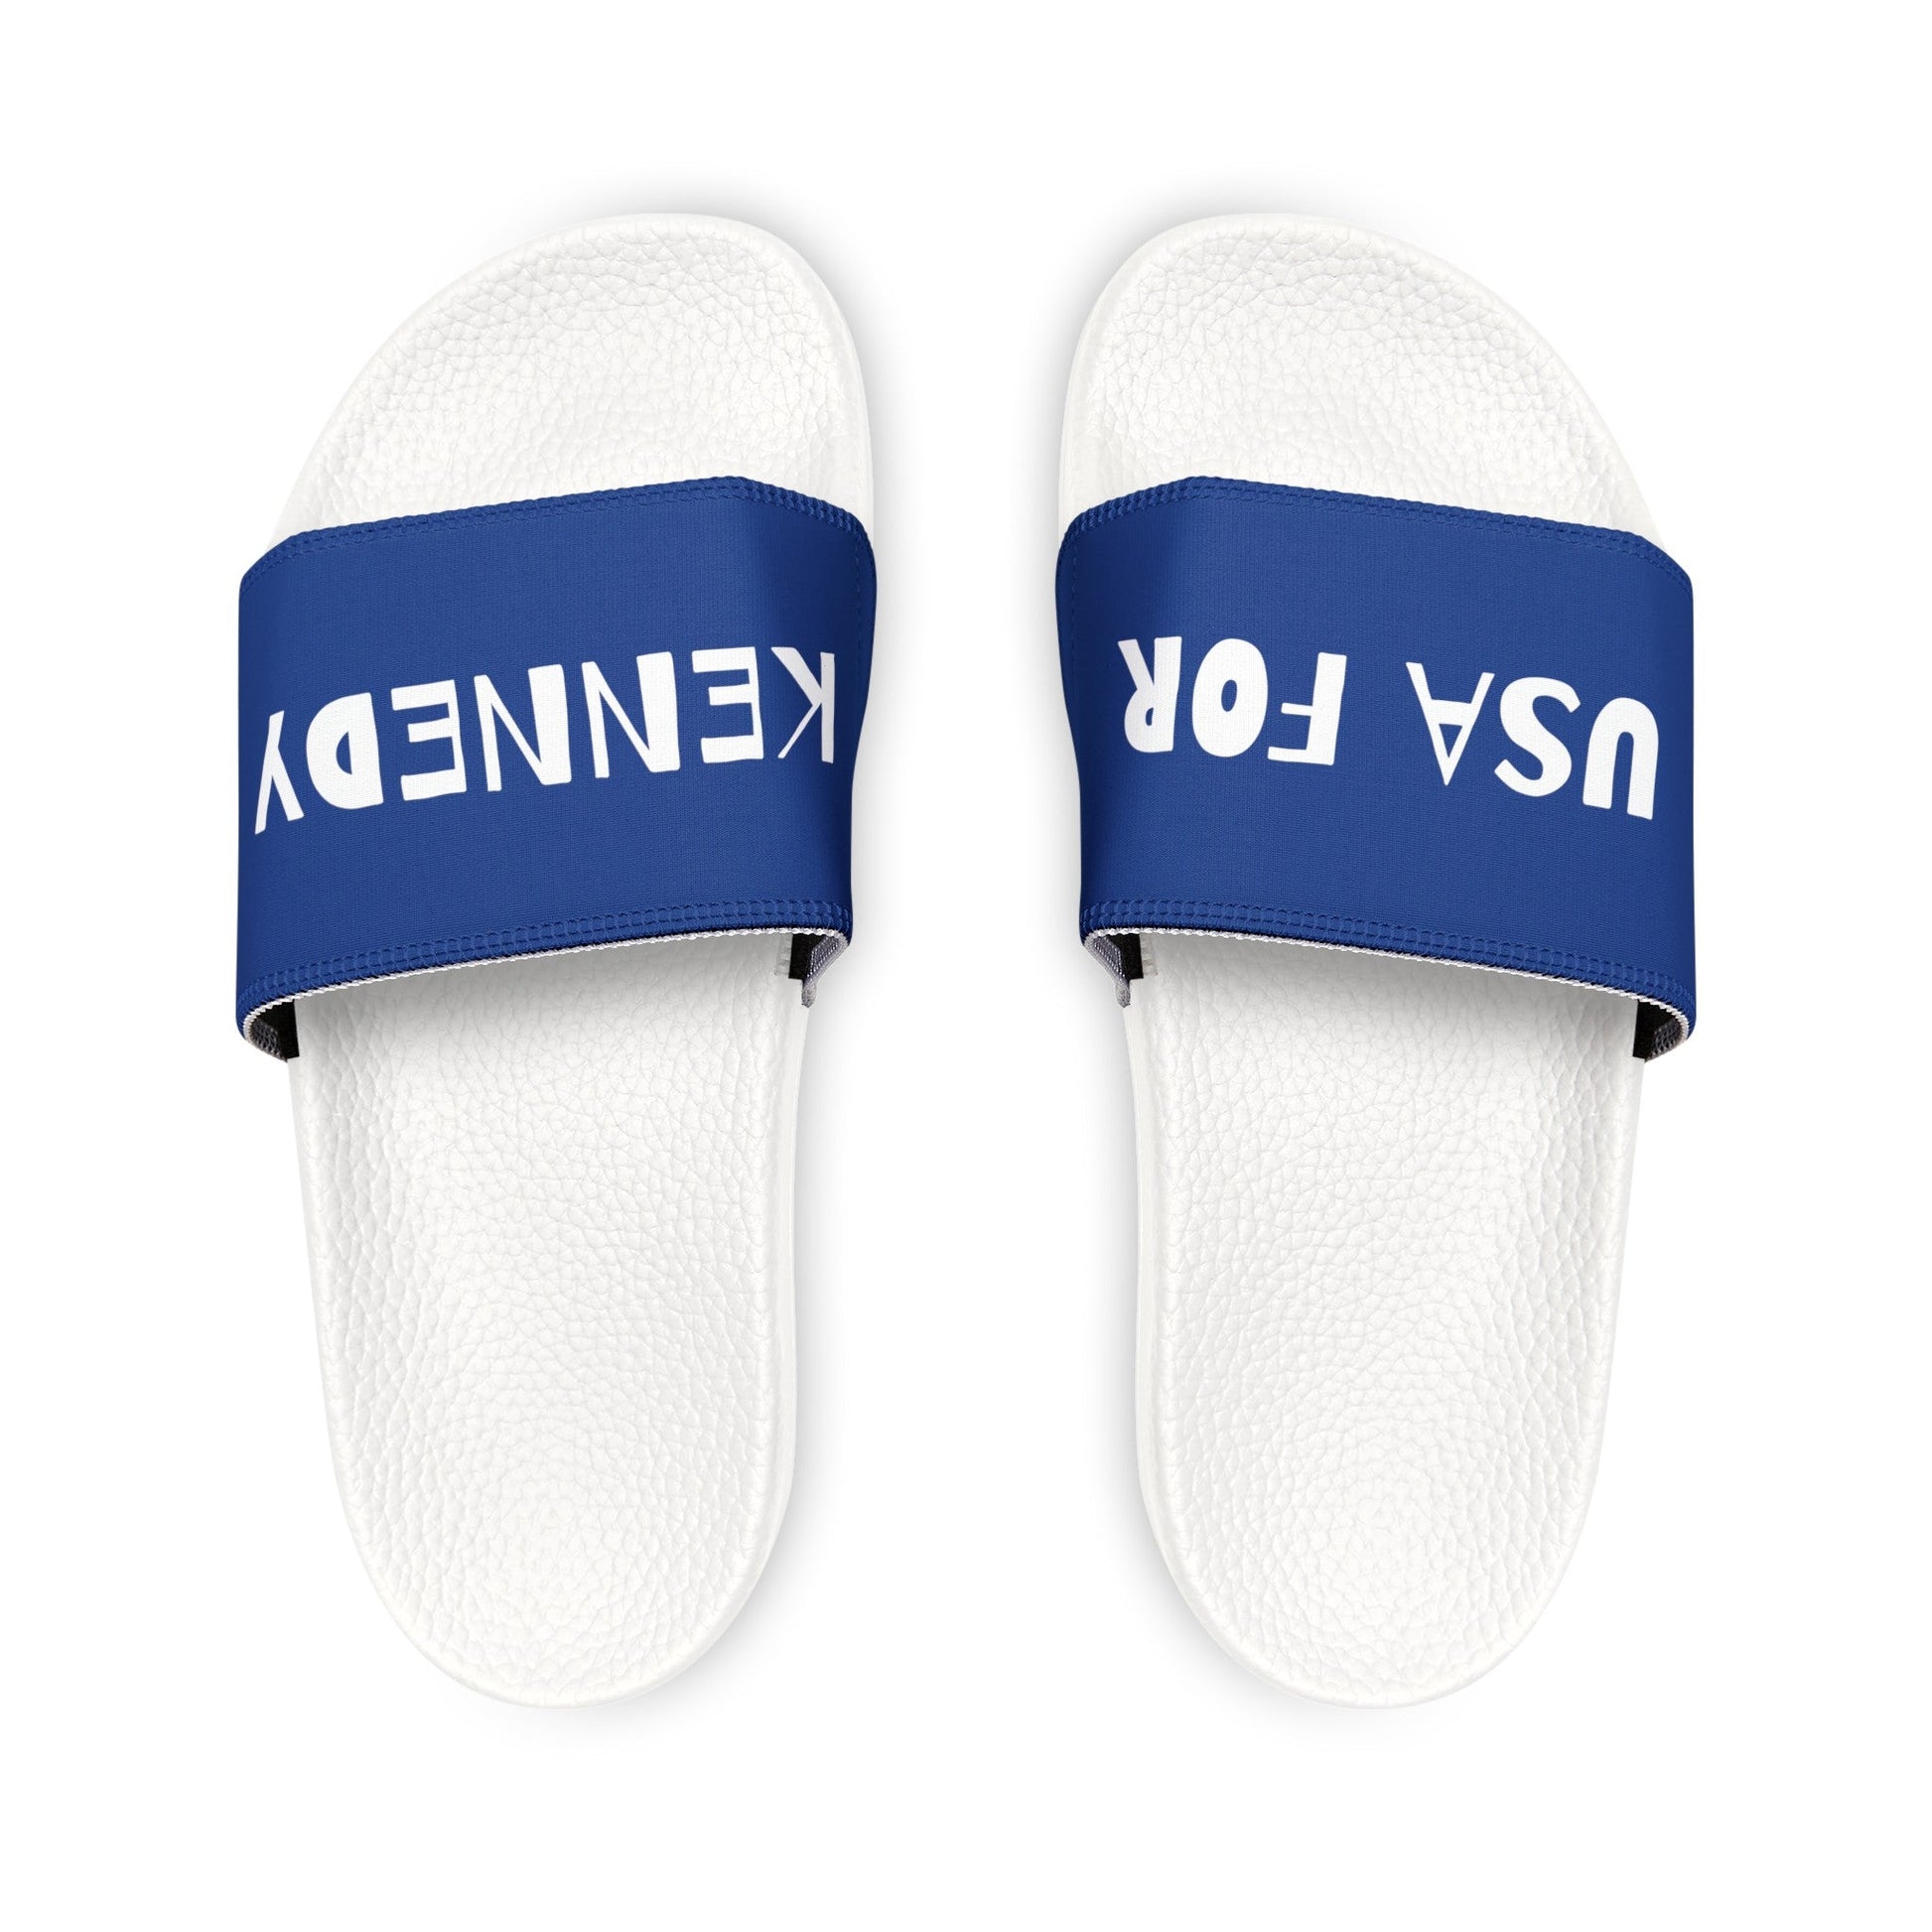 USA for Kennedy Women's Slides - TEAM KENNEDY. All rights reserved